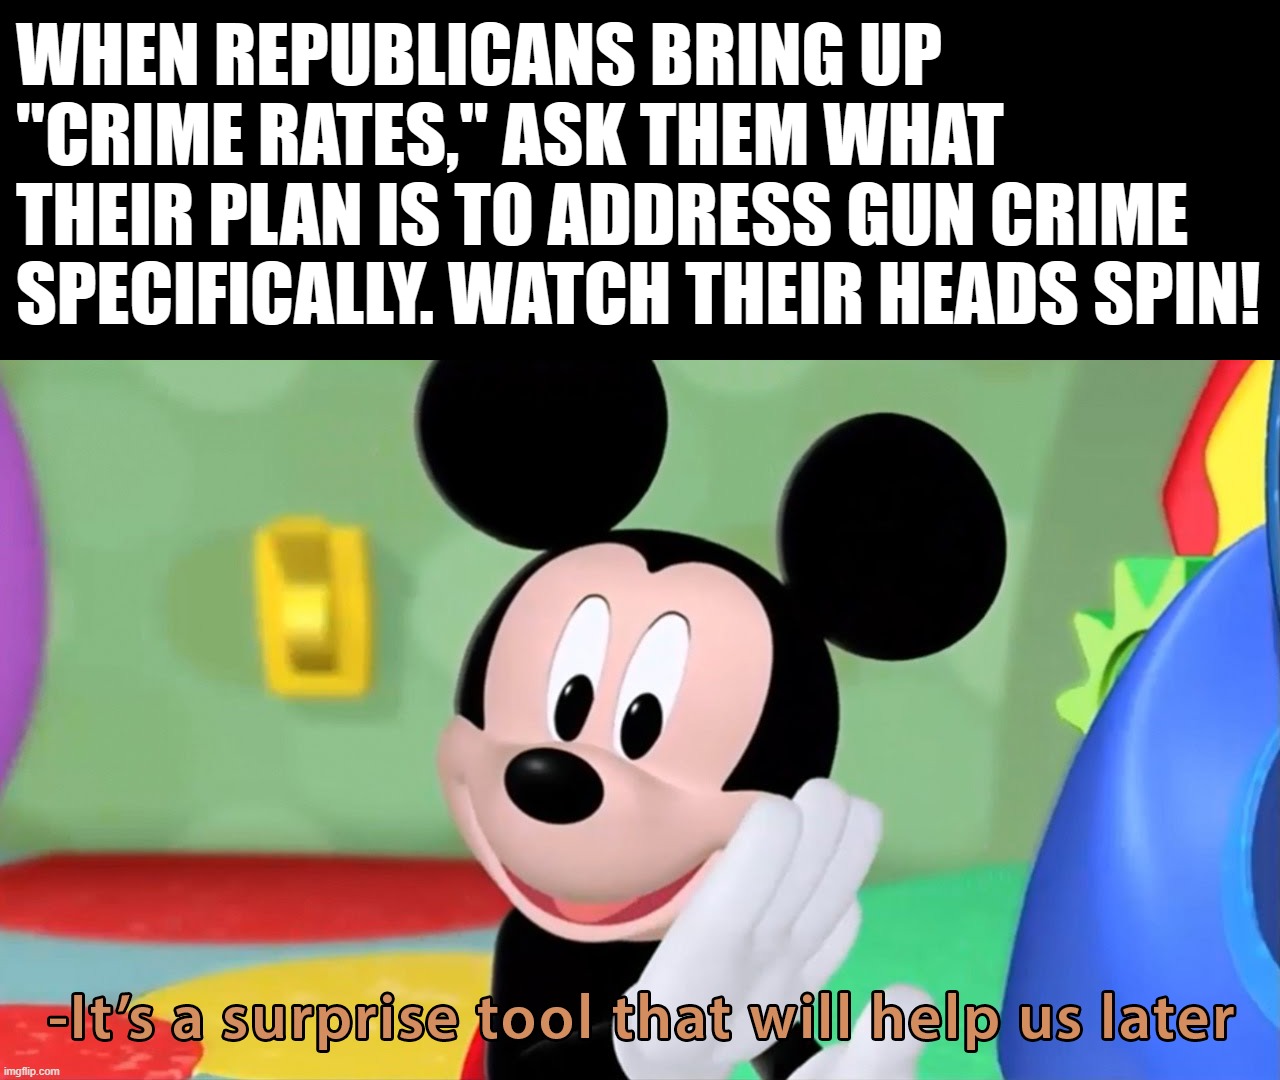 If their answer isn't, "take guns off the street to save children's lives," they're losing. | WHEN REPUBLICANS BRING UP "CRIME RATES," ASK THEM WHAT THEIR PLAN IS TO ADDRESS GUN CRIME SPECIFICALLY. WATCH THEIR HEADS SPIN! | image tagged in it s a surprise tool,gun control,guns,crime,crime rates,crimes | made w/ Imgflip meme maker